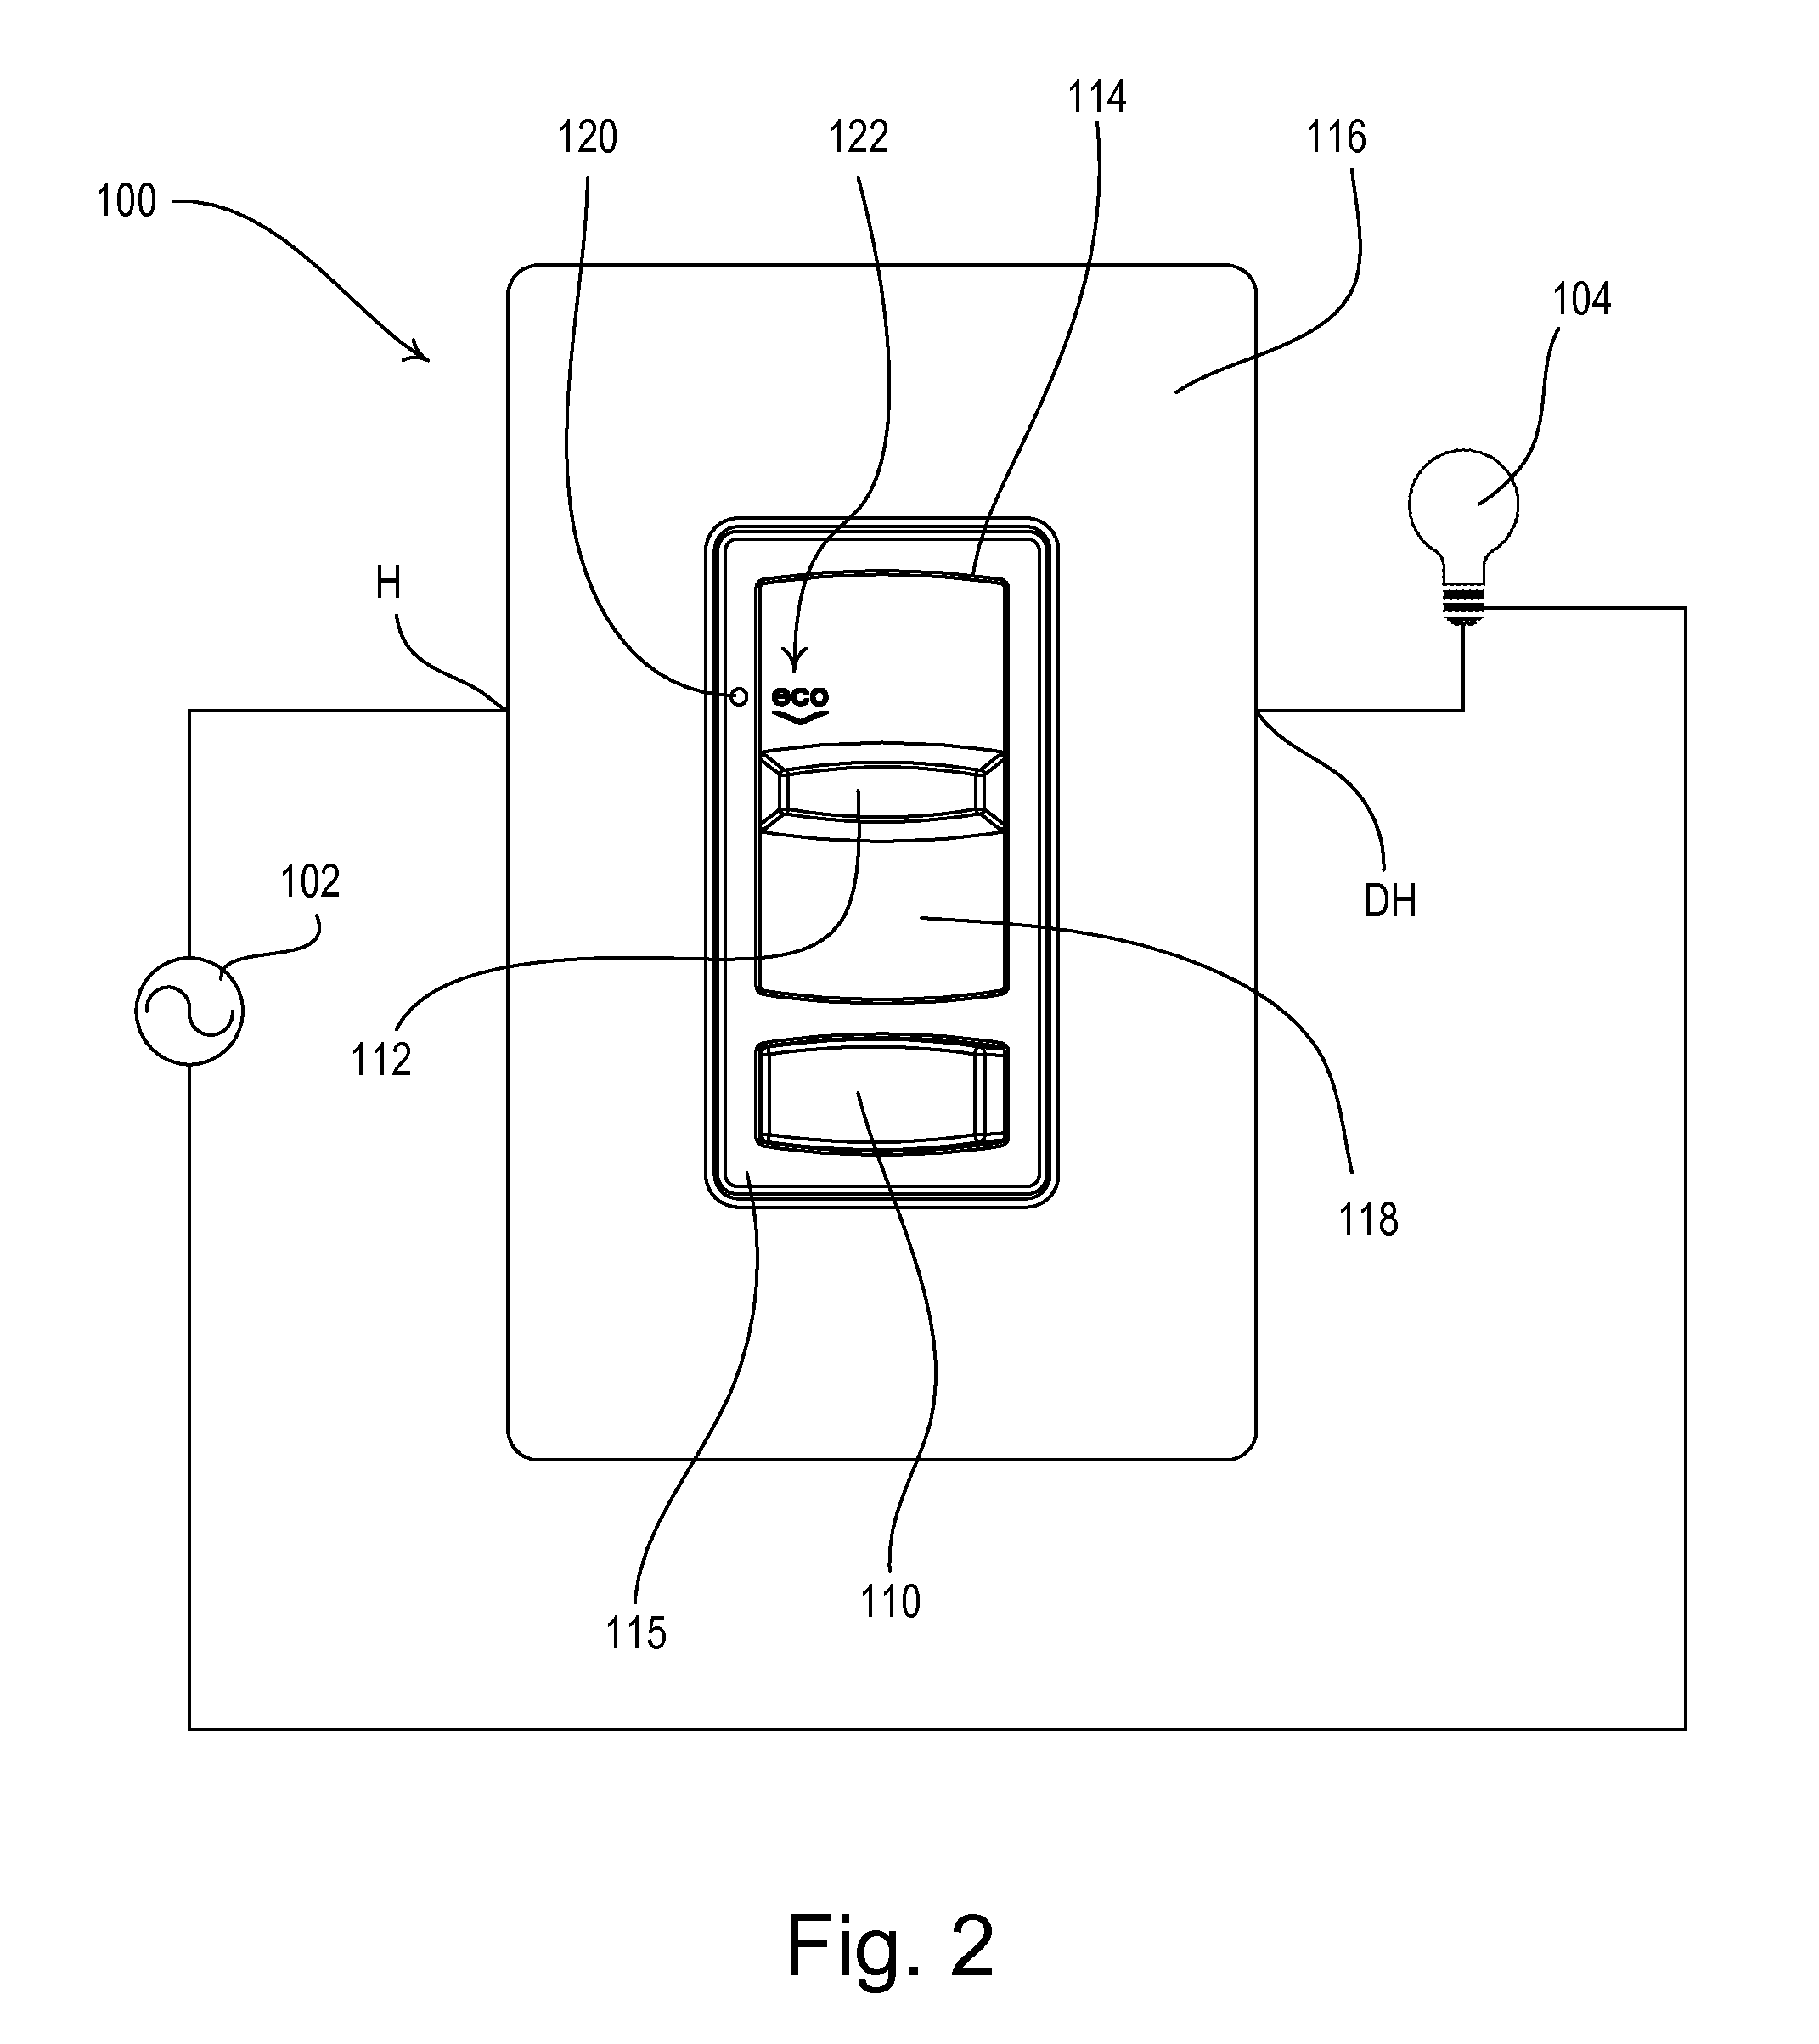 Load Control Device Having A Visual Indication of Energy Savings and Usage Information